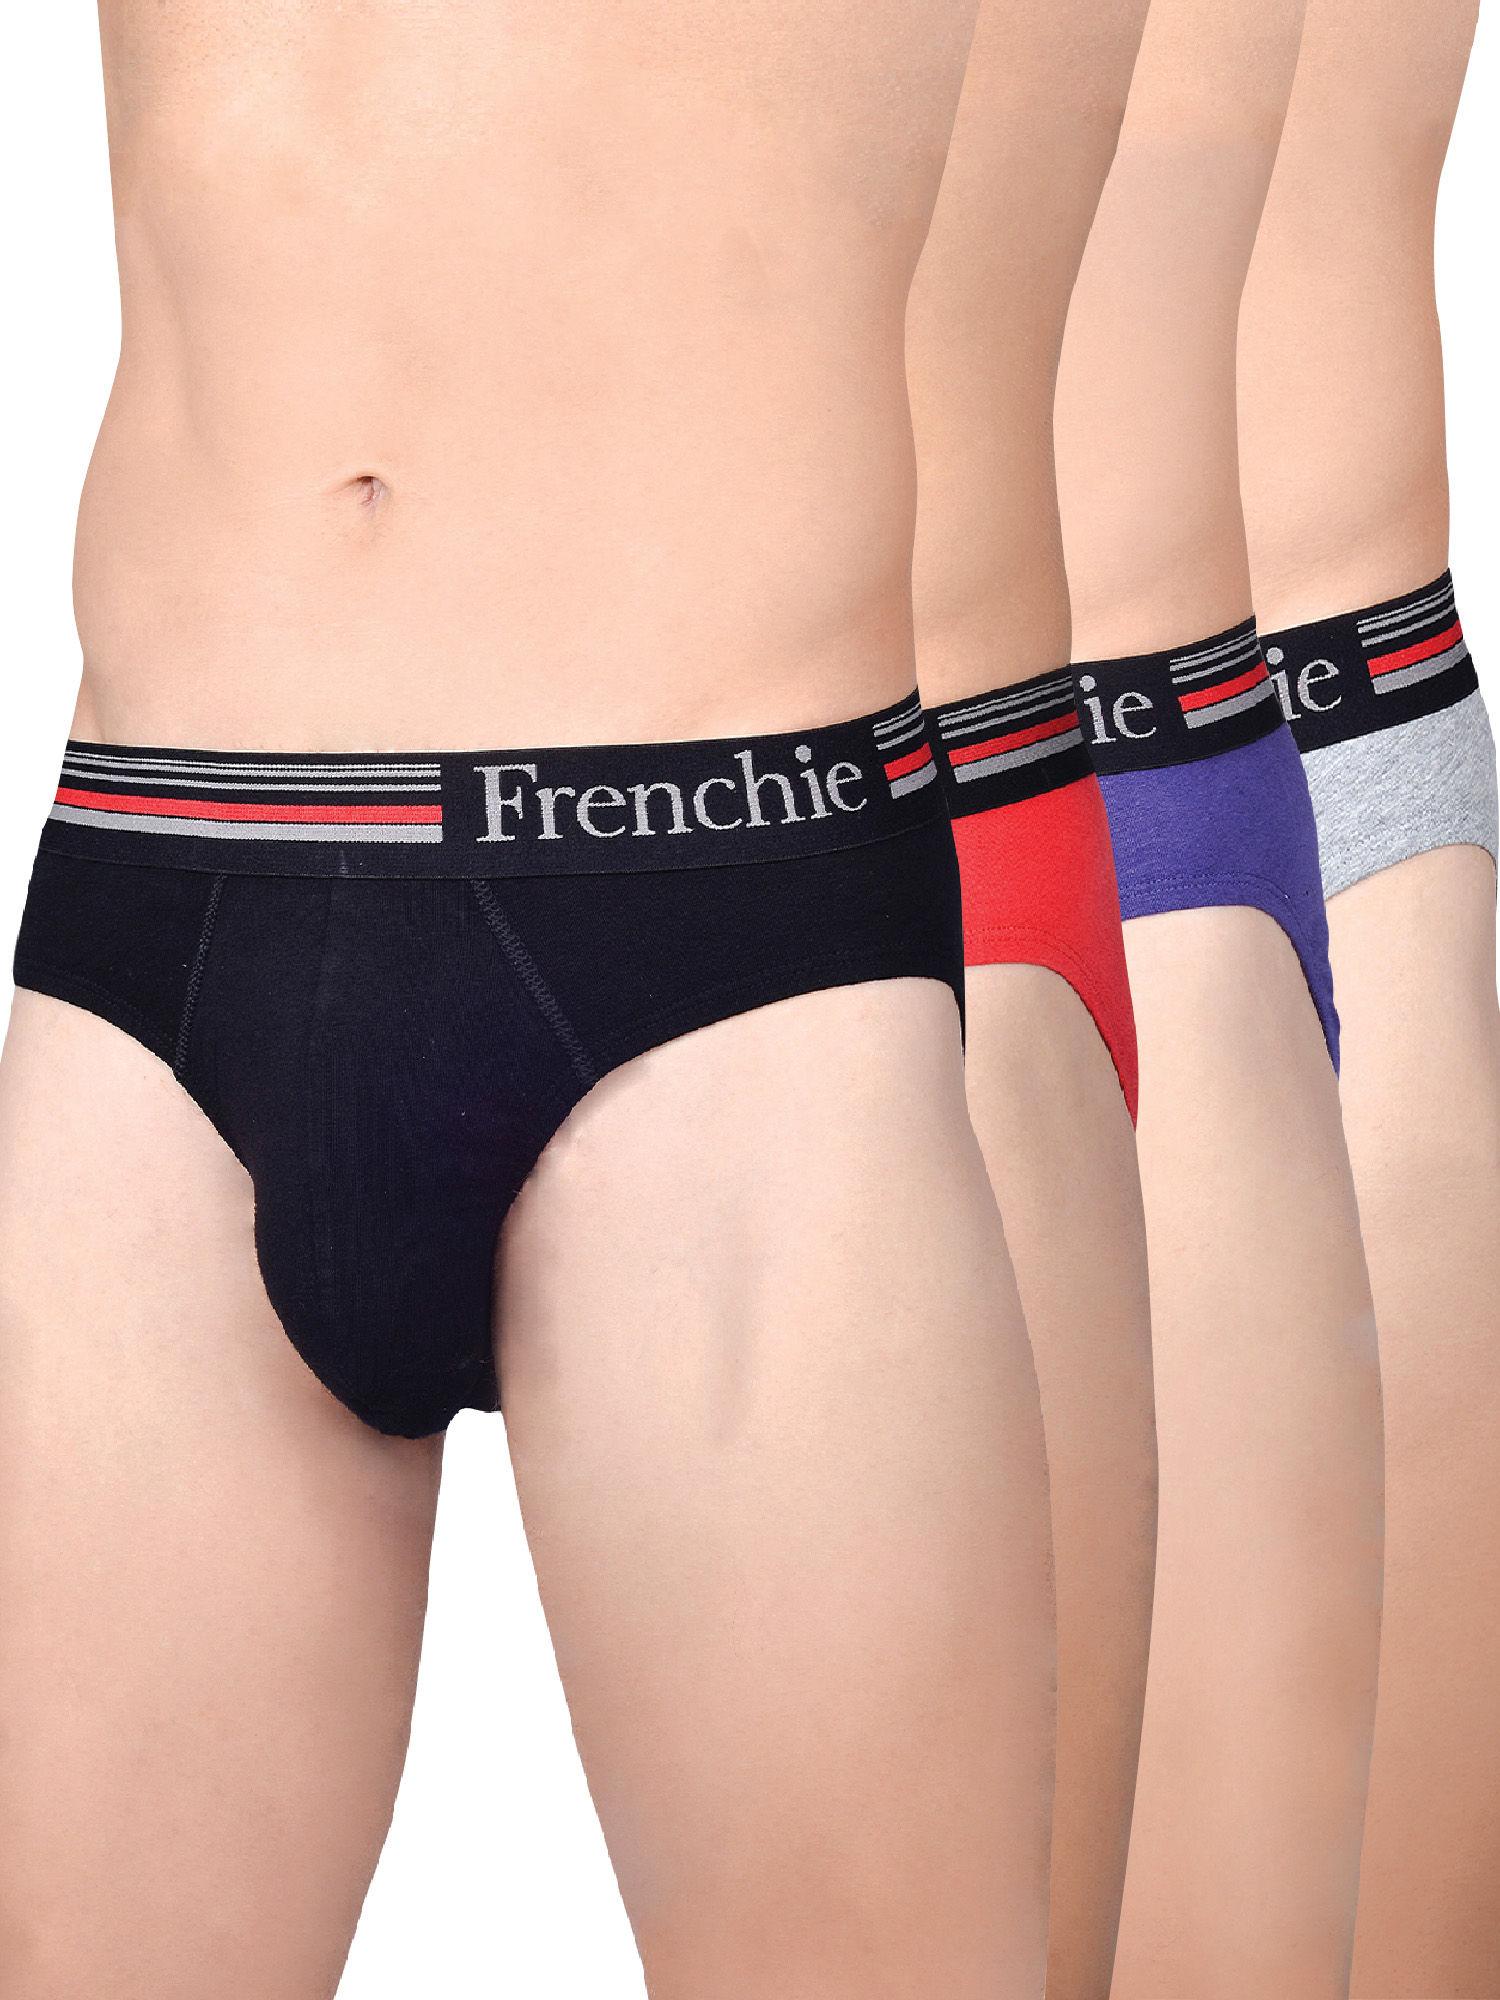 casuals-4000-mens-cotton-briefs-assorted-colours-(pack-of-4)